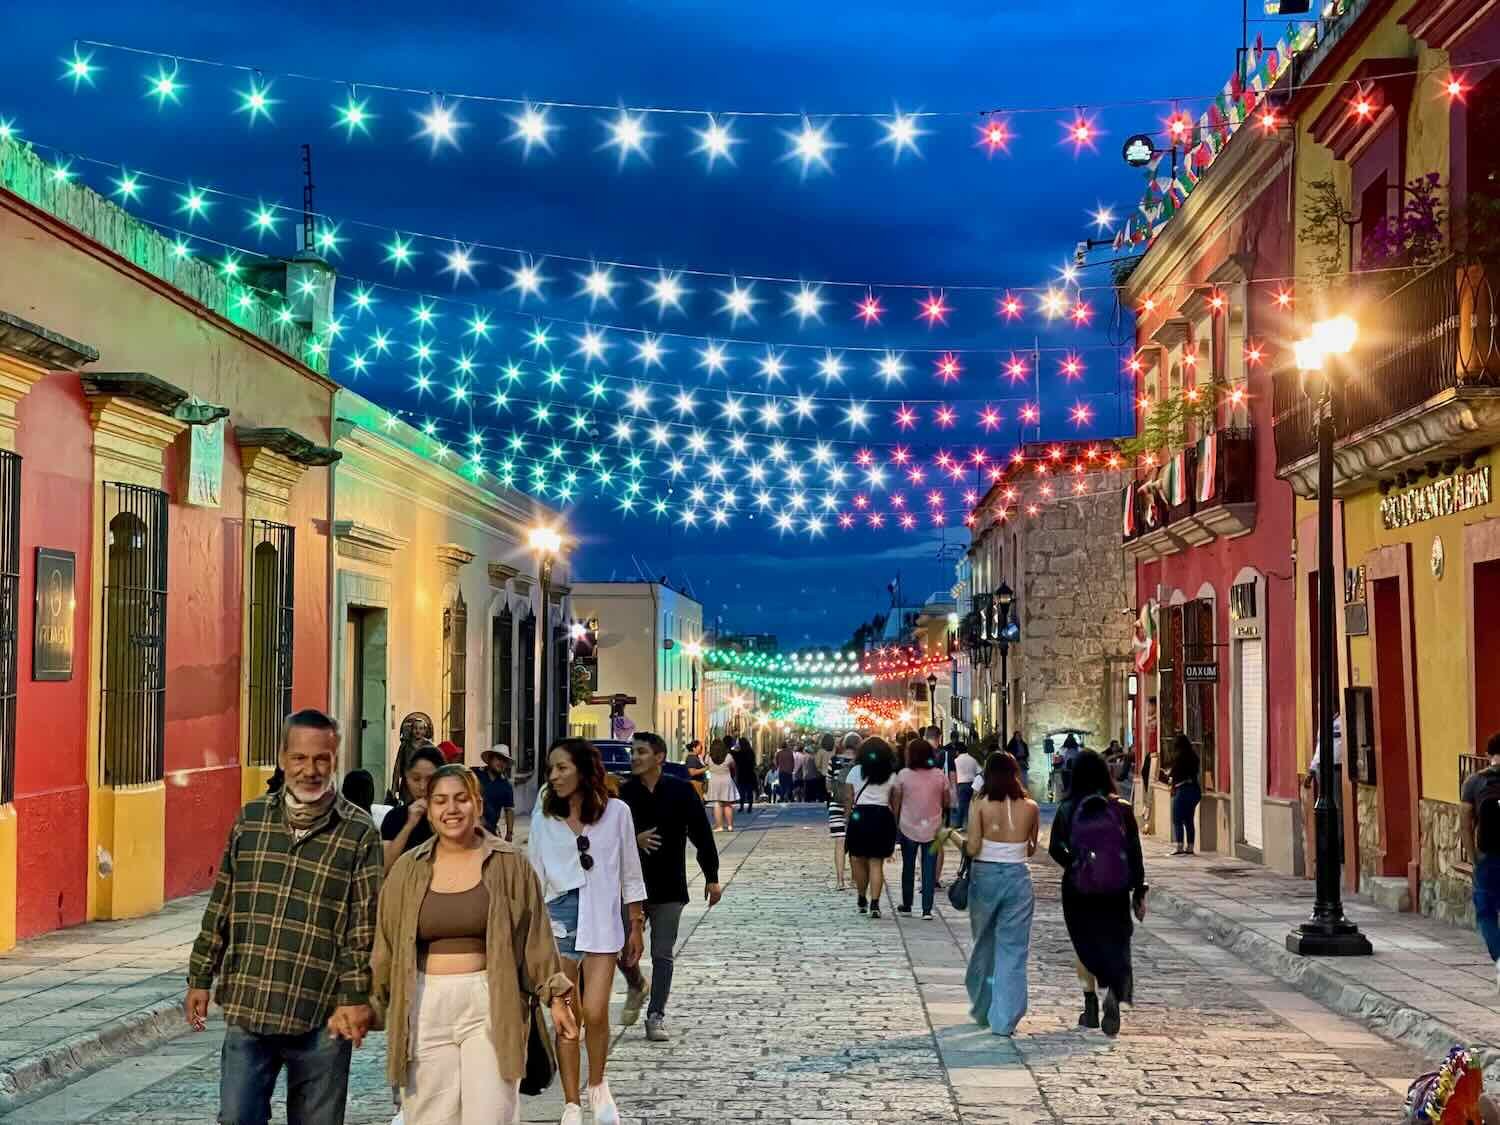 Strings of red, white and green lights illuminated many public spaces at night